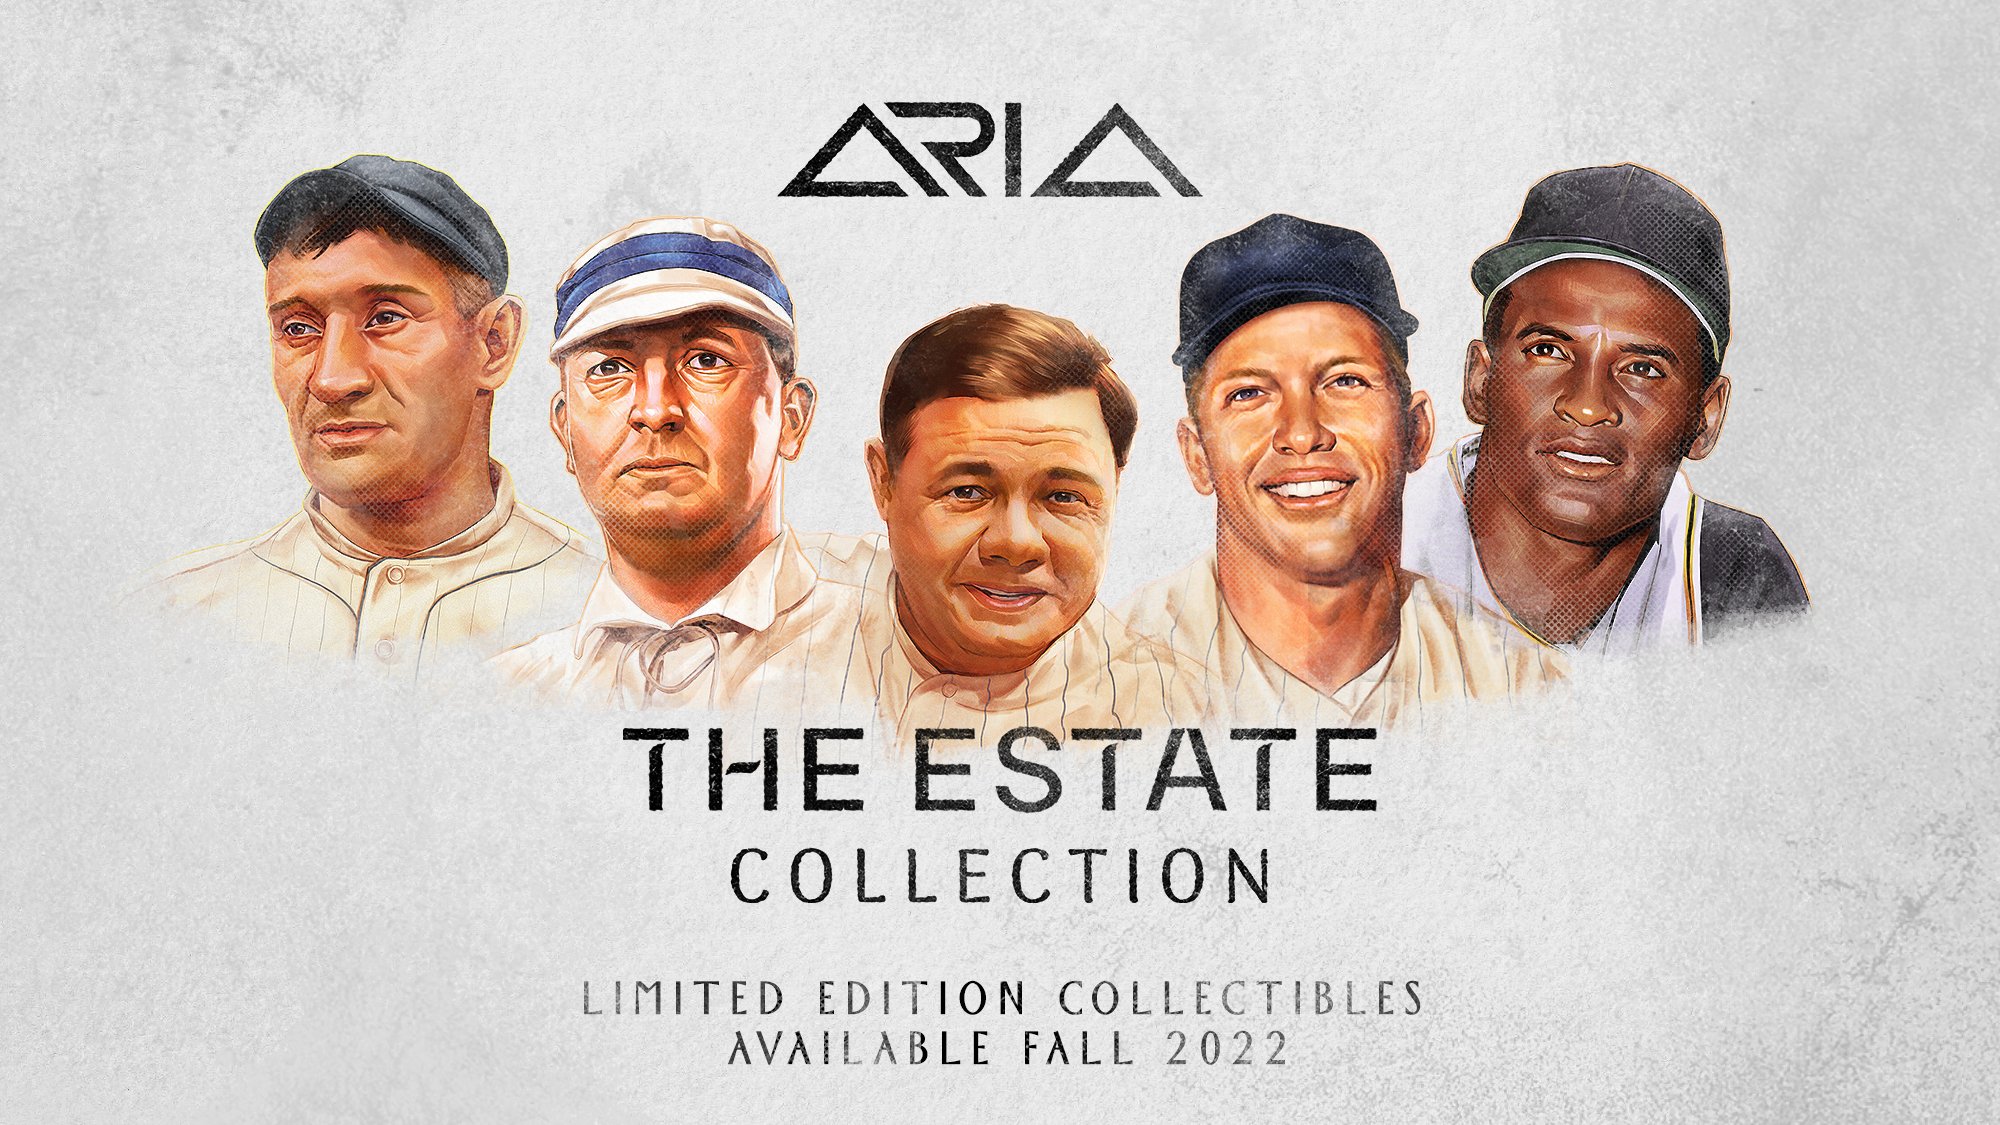 ARIA Exchange Estate Collection poster featuring legendary sports figures